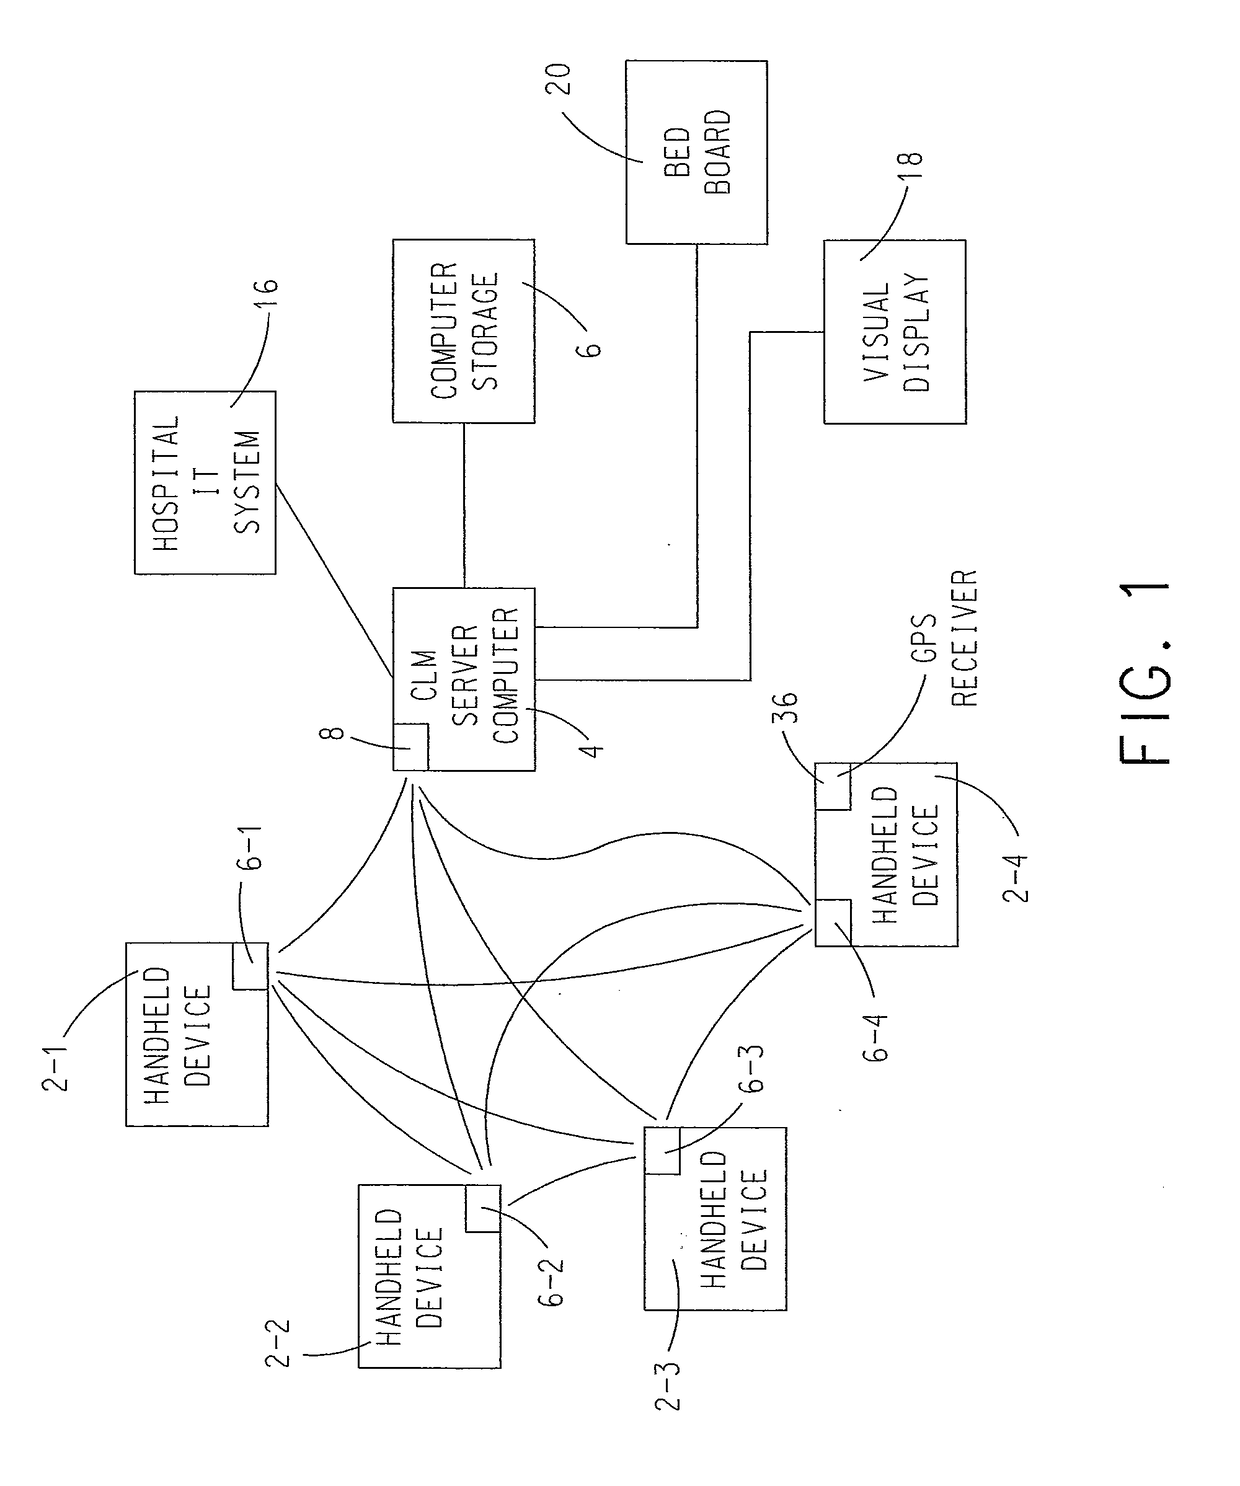 System and Method of Patient Flow and Treatment Management